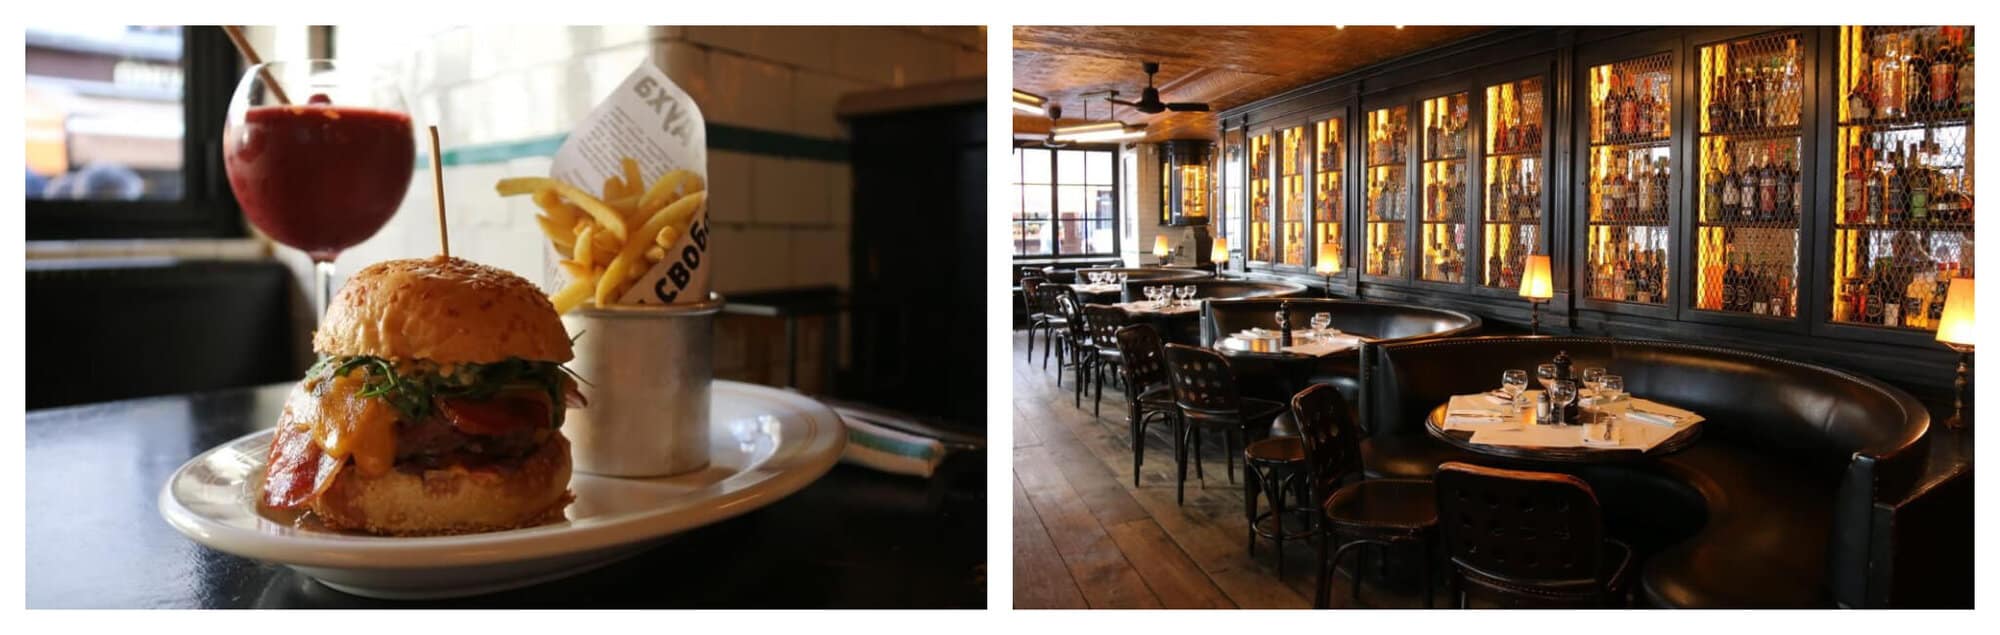 Left: A huge hamburger with a tin cup of yellow potato fries and a glass of red cocktail. Right: An interior of a restaurant with dark brown leather couches, dark brown chairs, and a long cabinet full of wine and spirits.